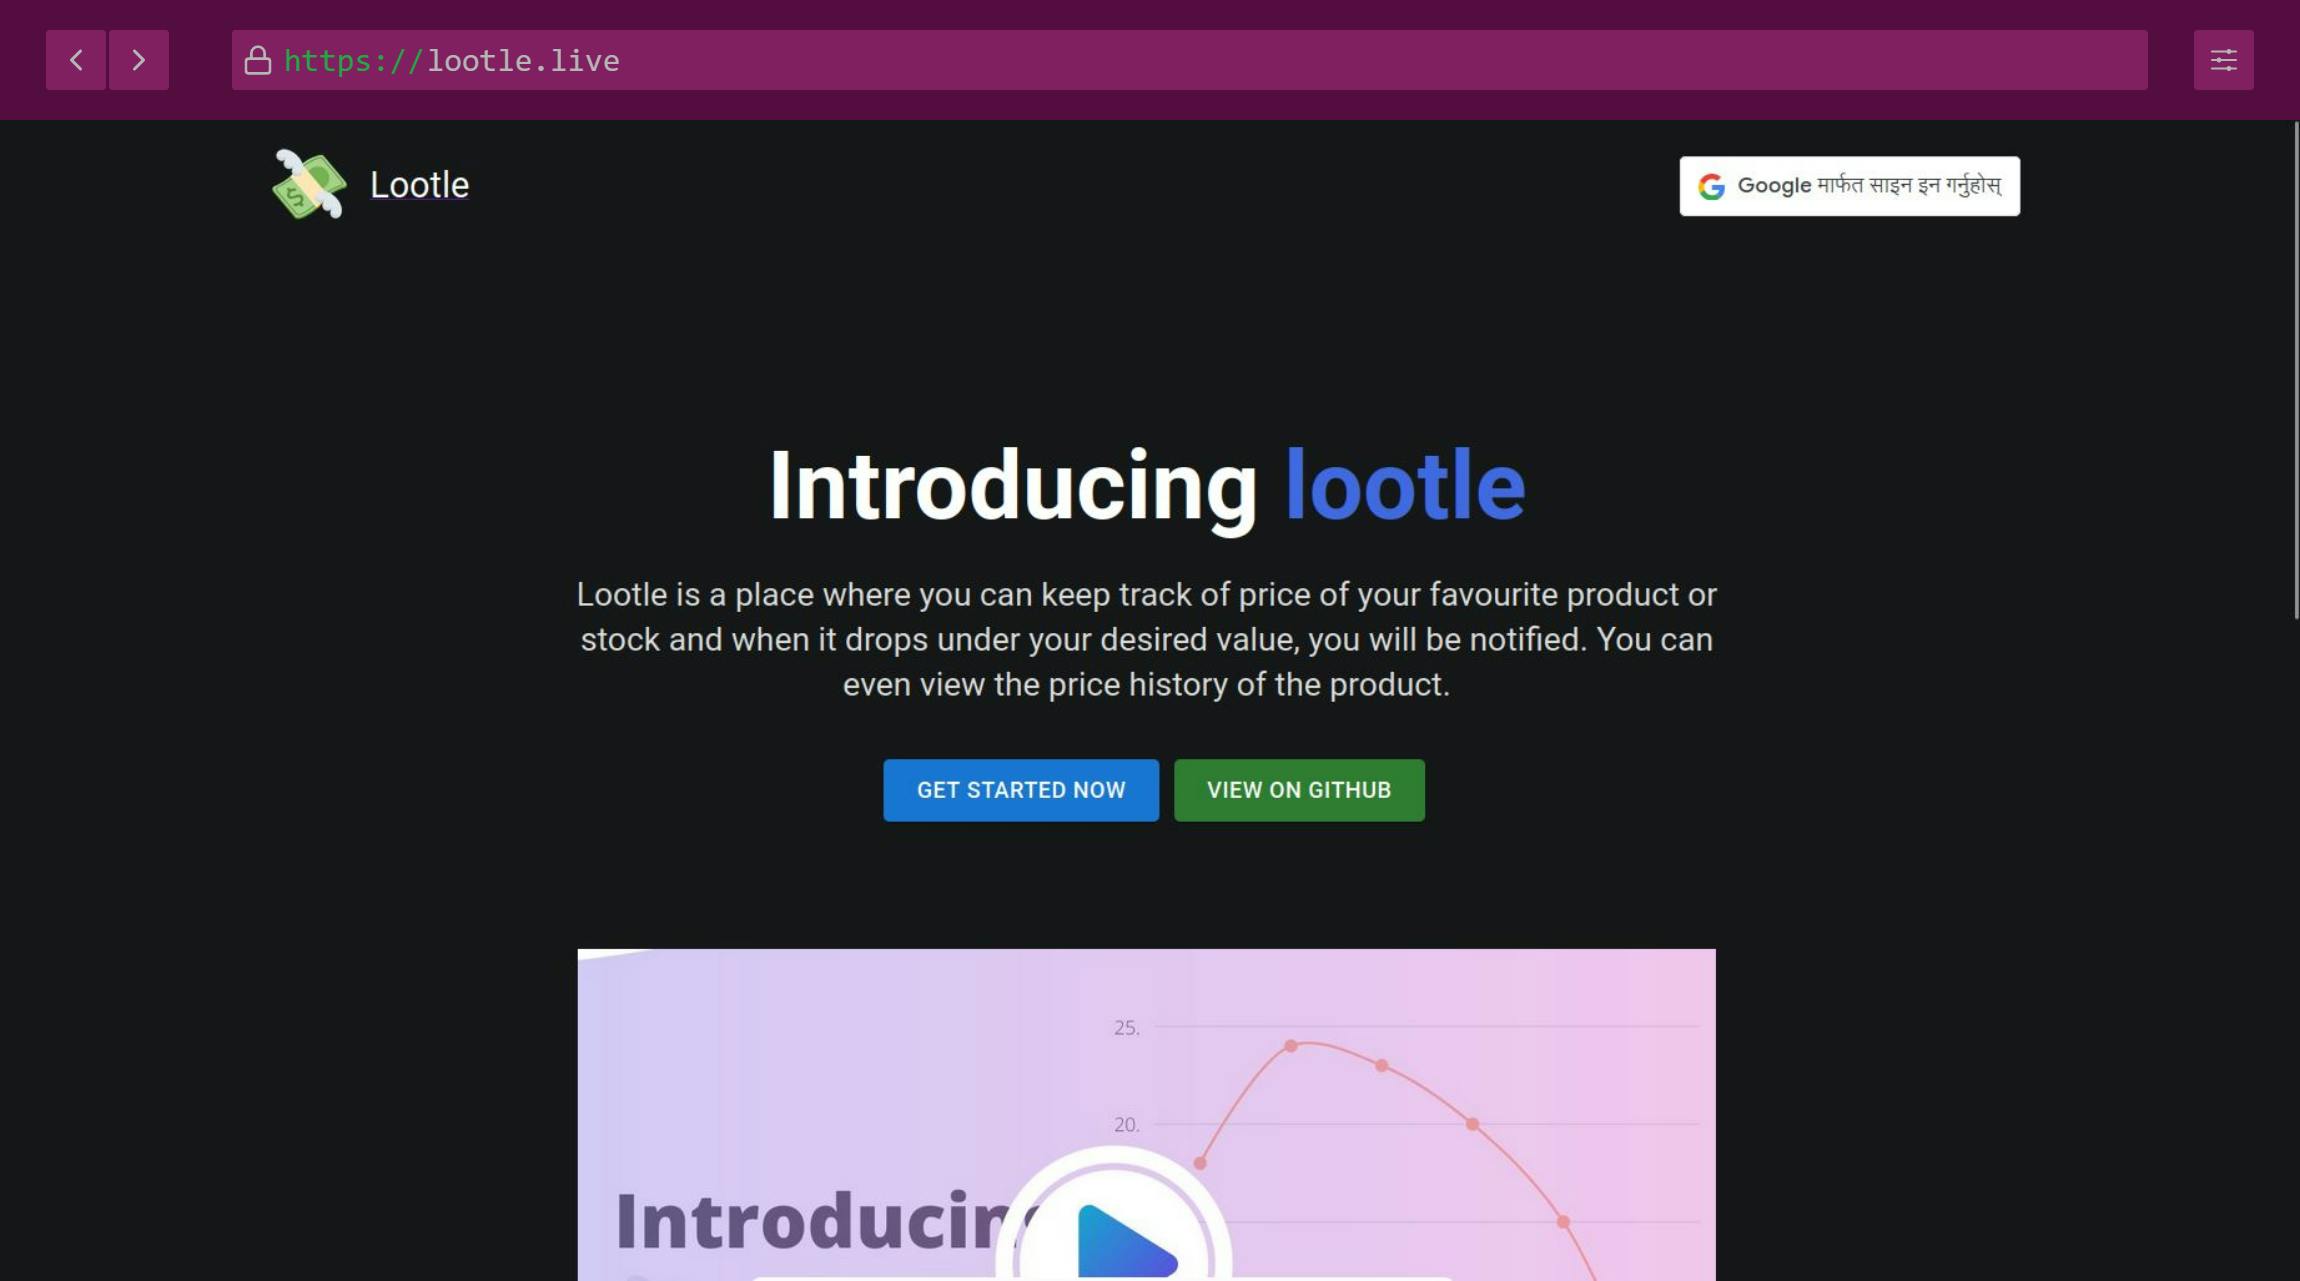 Home page of lootle